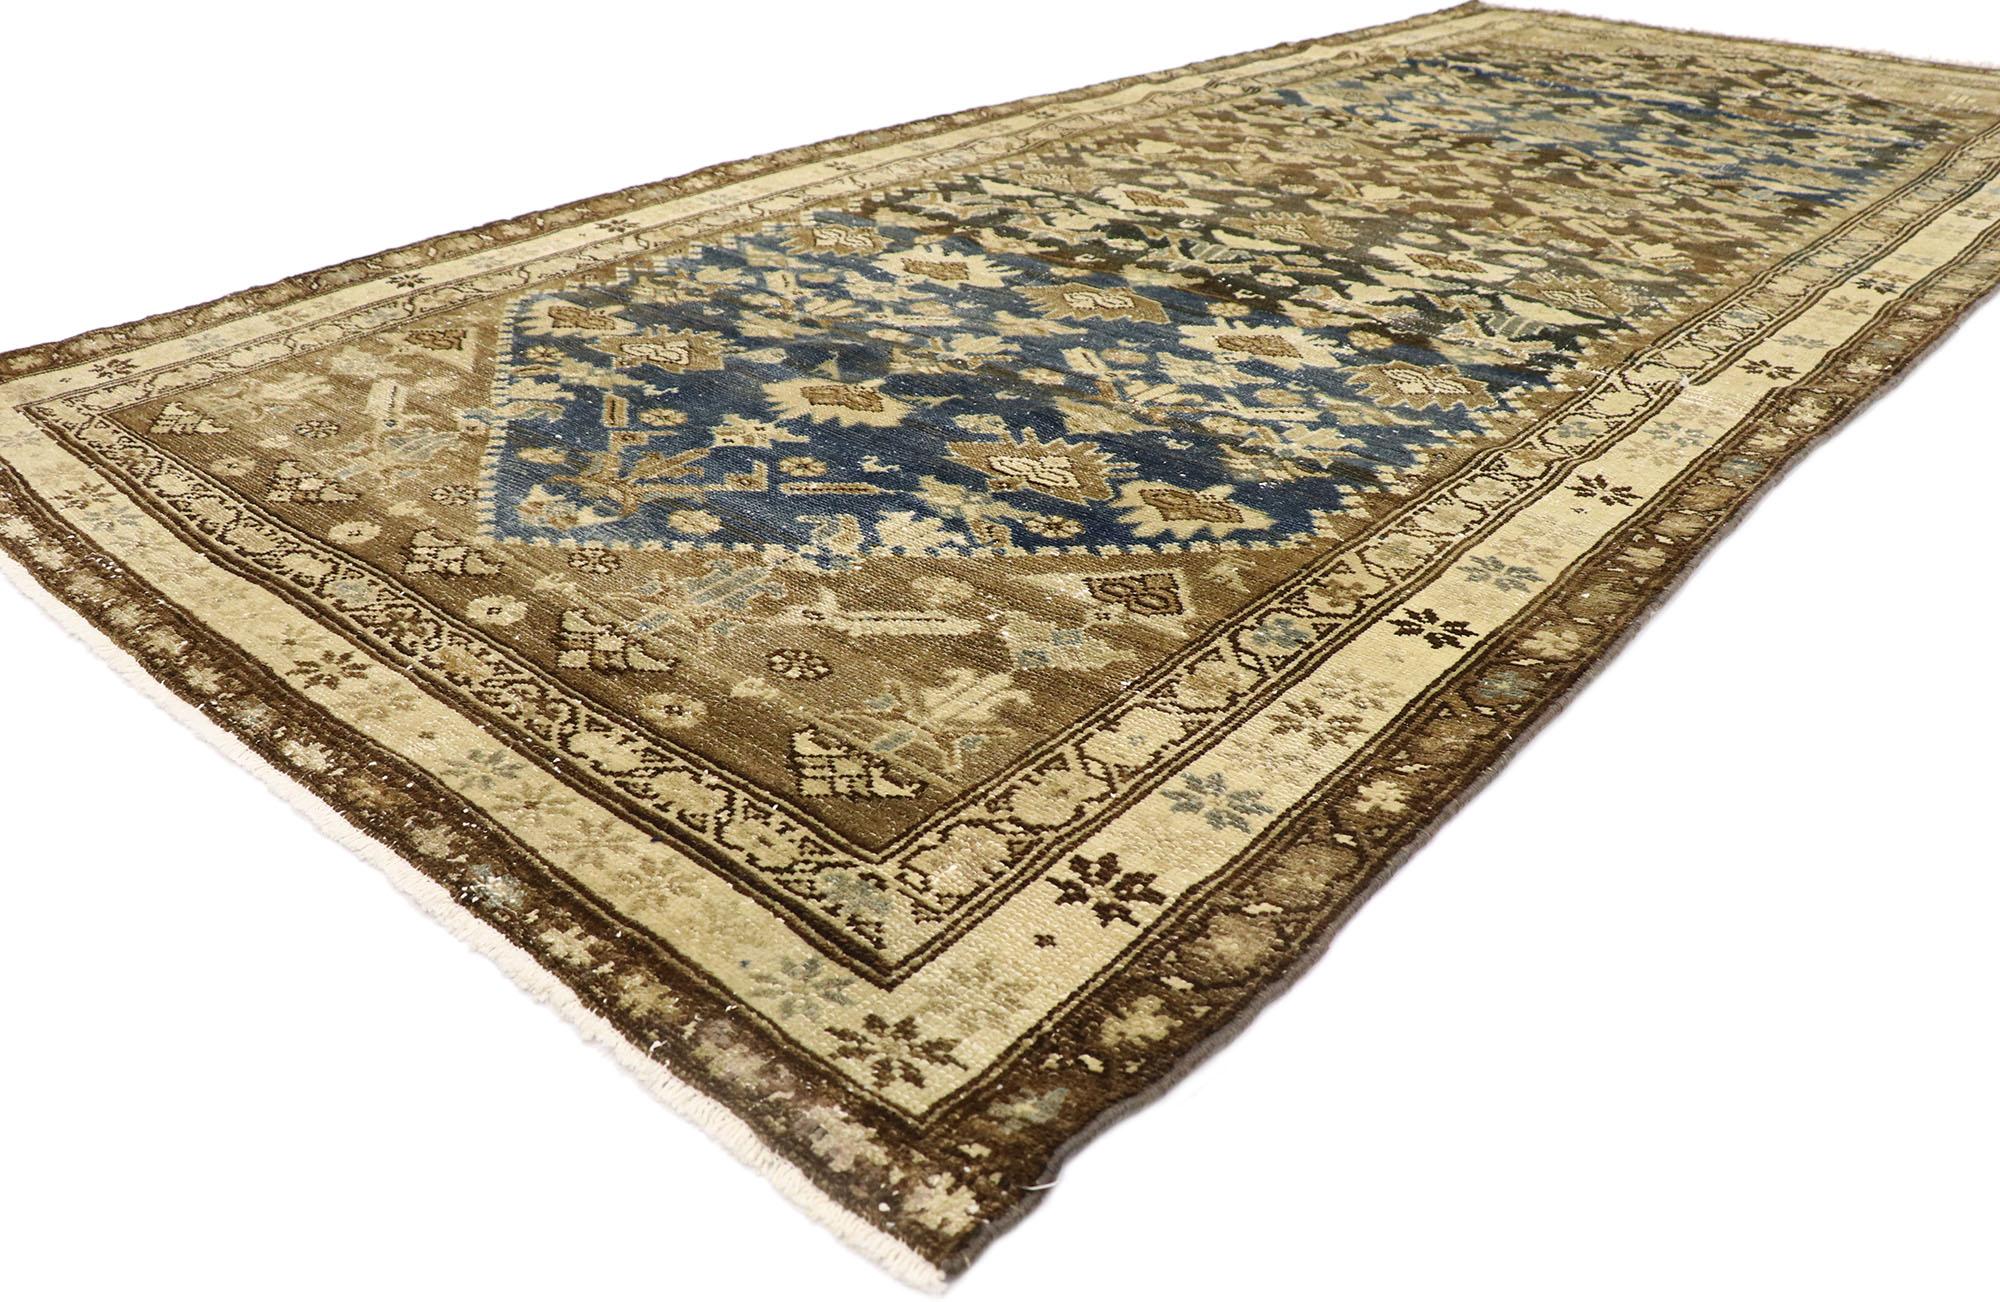 60968 Distressed Vintage Persian Malayer Gallery Rug 05'00 x 11'04. With its lovingly time-worn composition and rugged beauty, this hand-knotted wool distressed vintage Persian Malayer gallery rug is a captivating vision of woven beauty. The